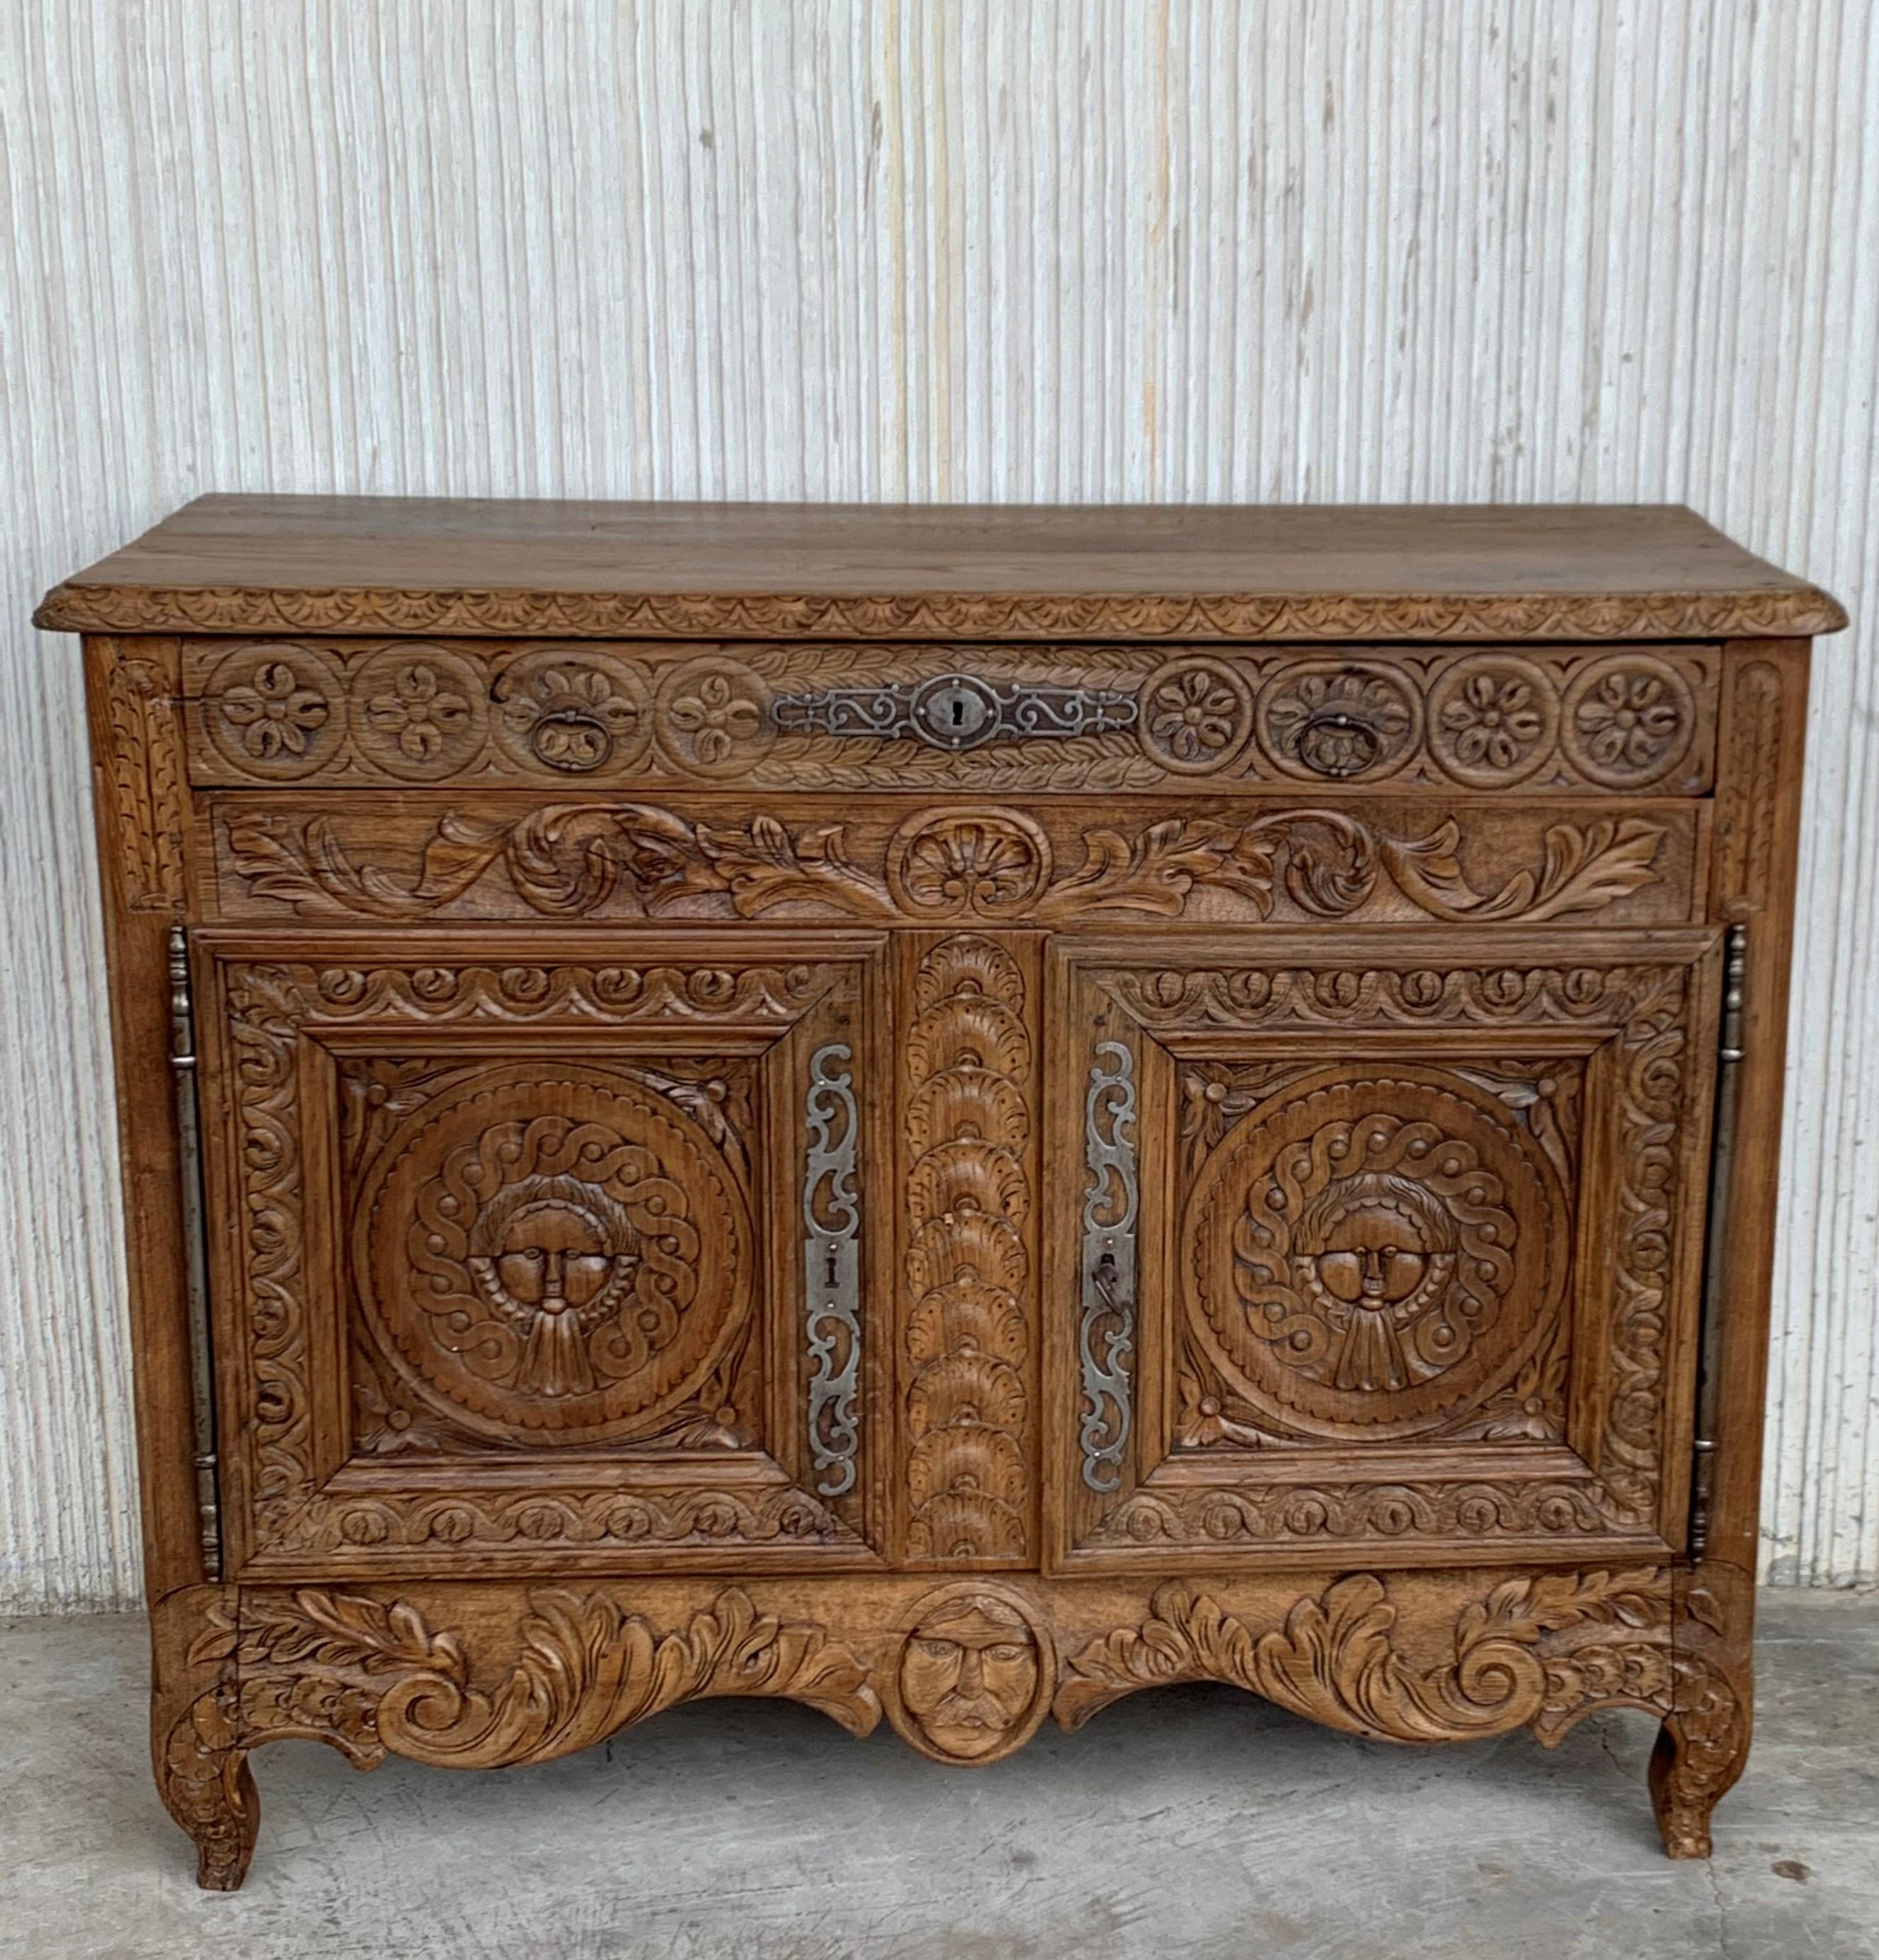 19th century Spanish hand carved Baroque oak cabinet with two drawers and two doors

Really beautiful piece.

Sideboard, cupboard, and console.